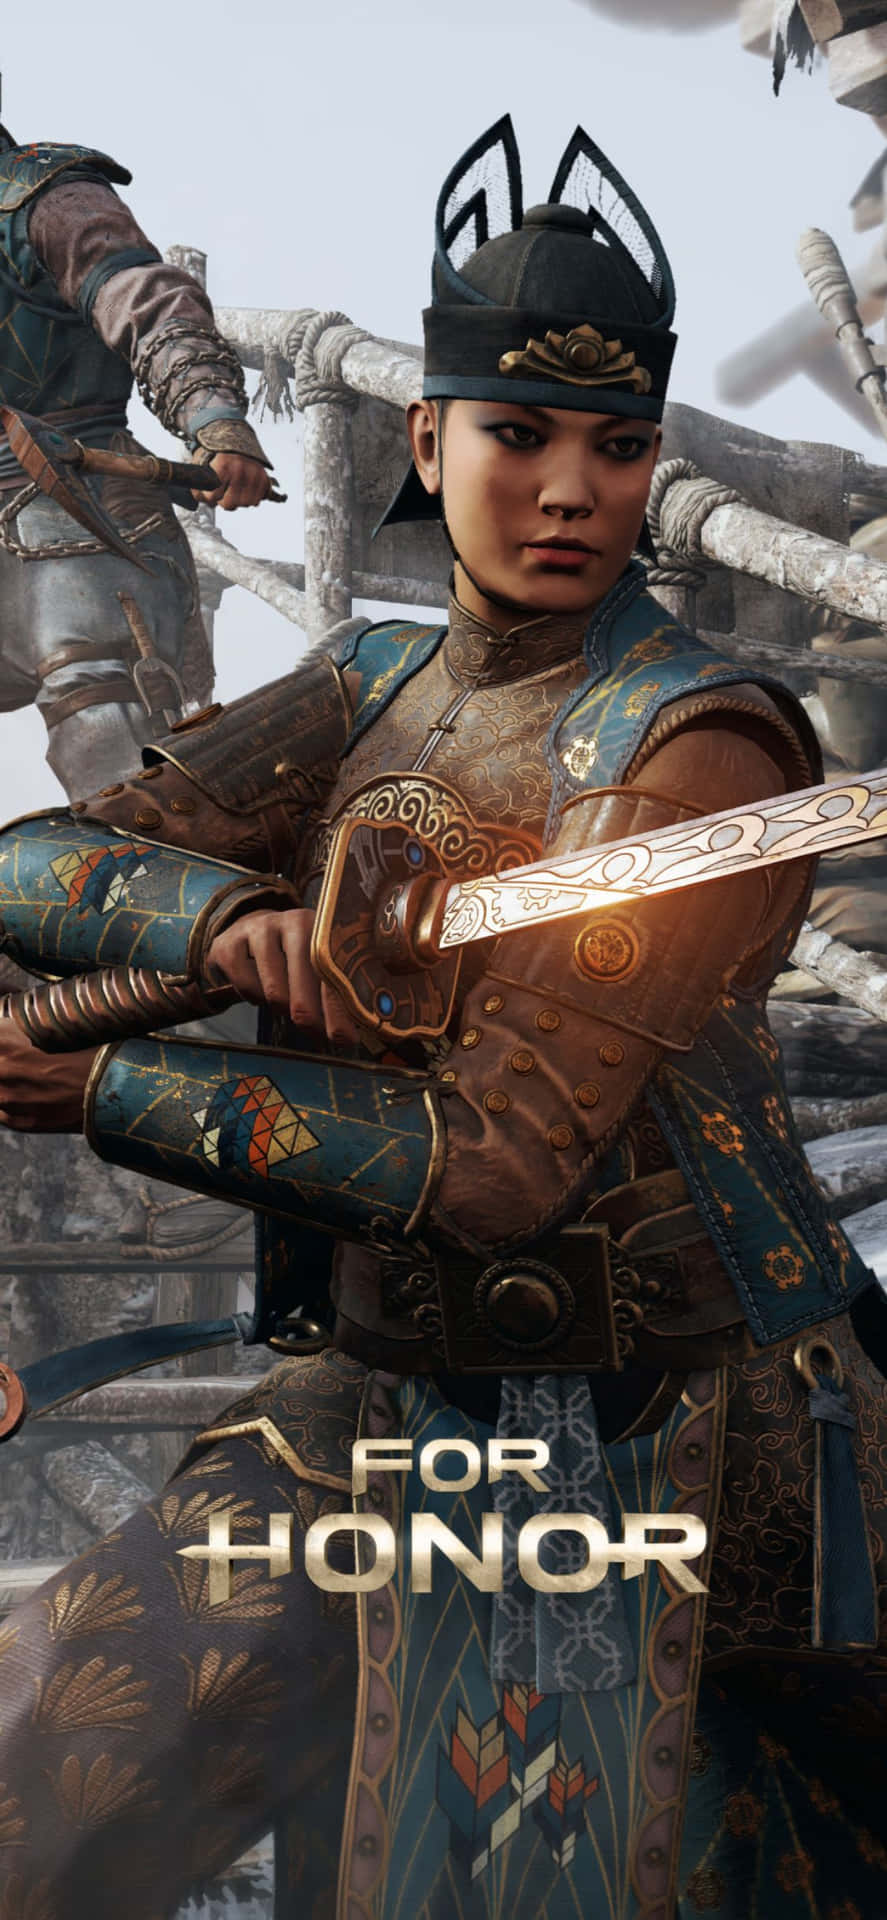 A Woman With A Sword Is Holding A Sword